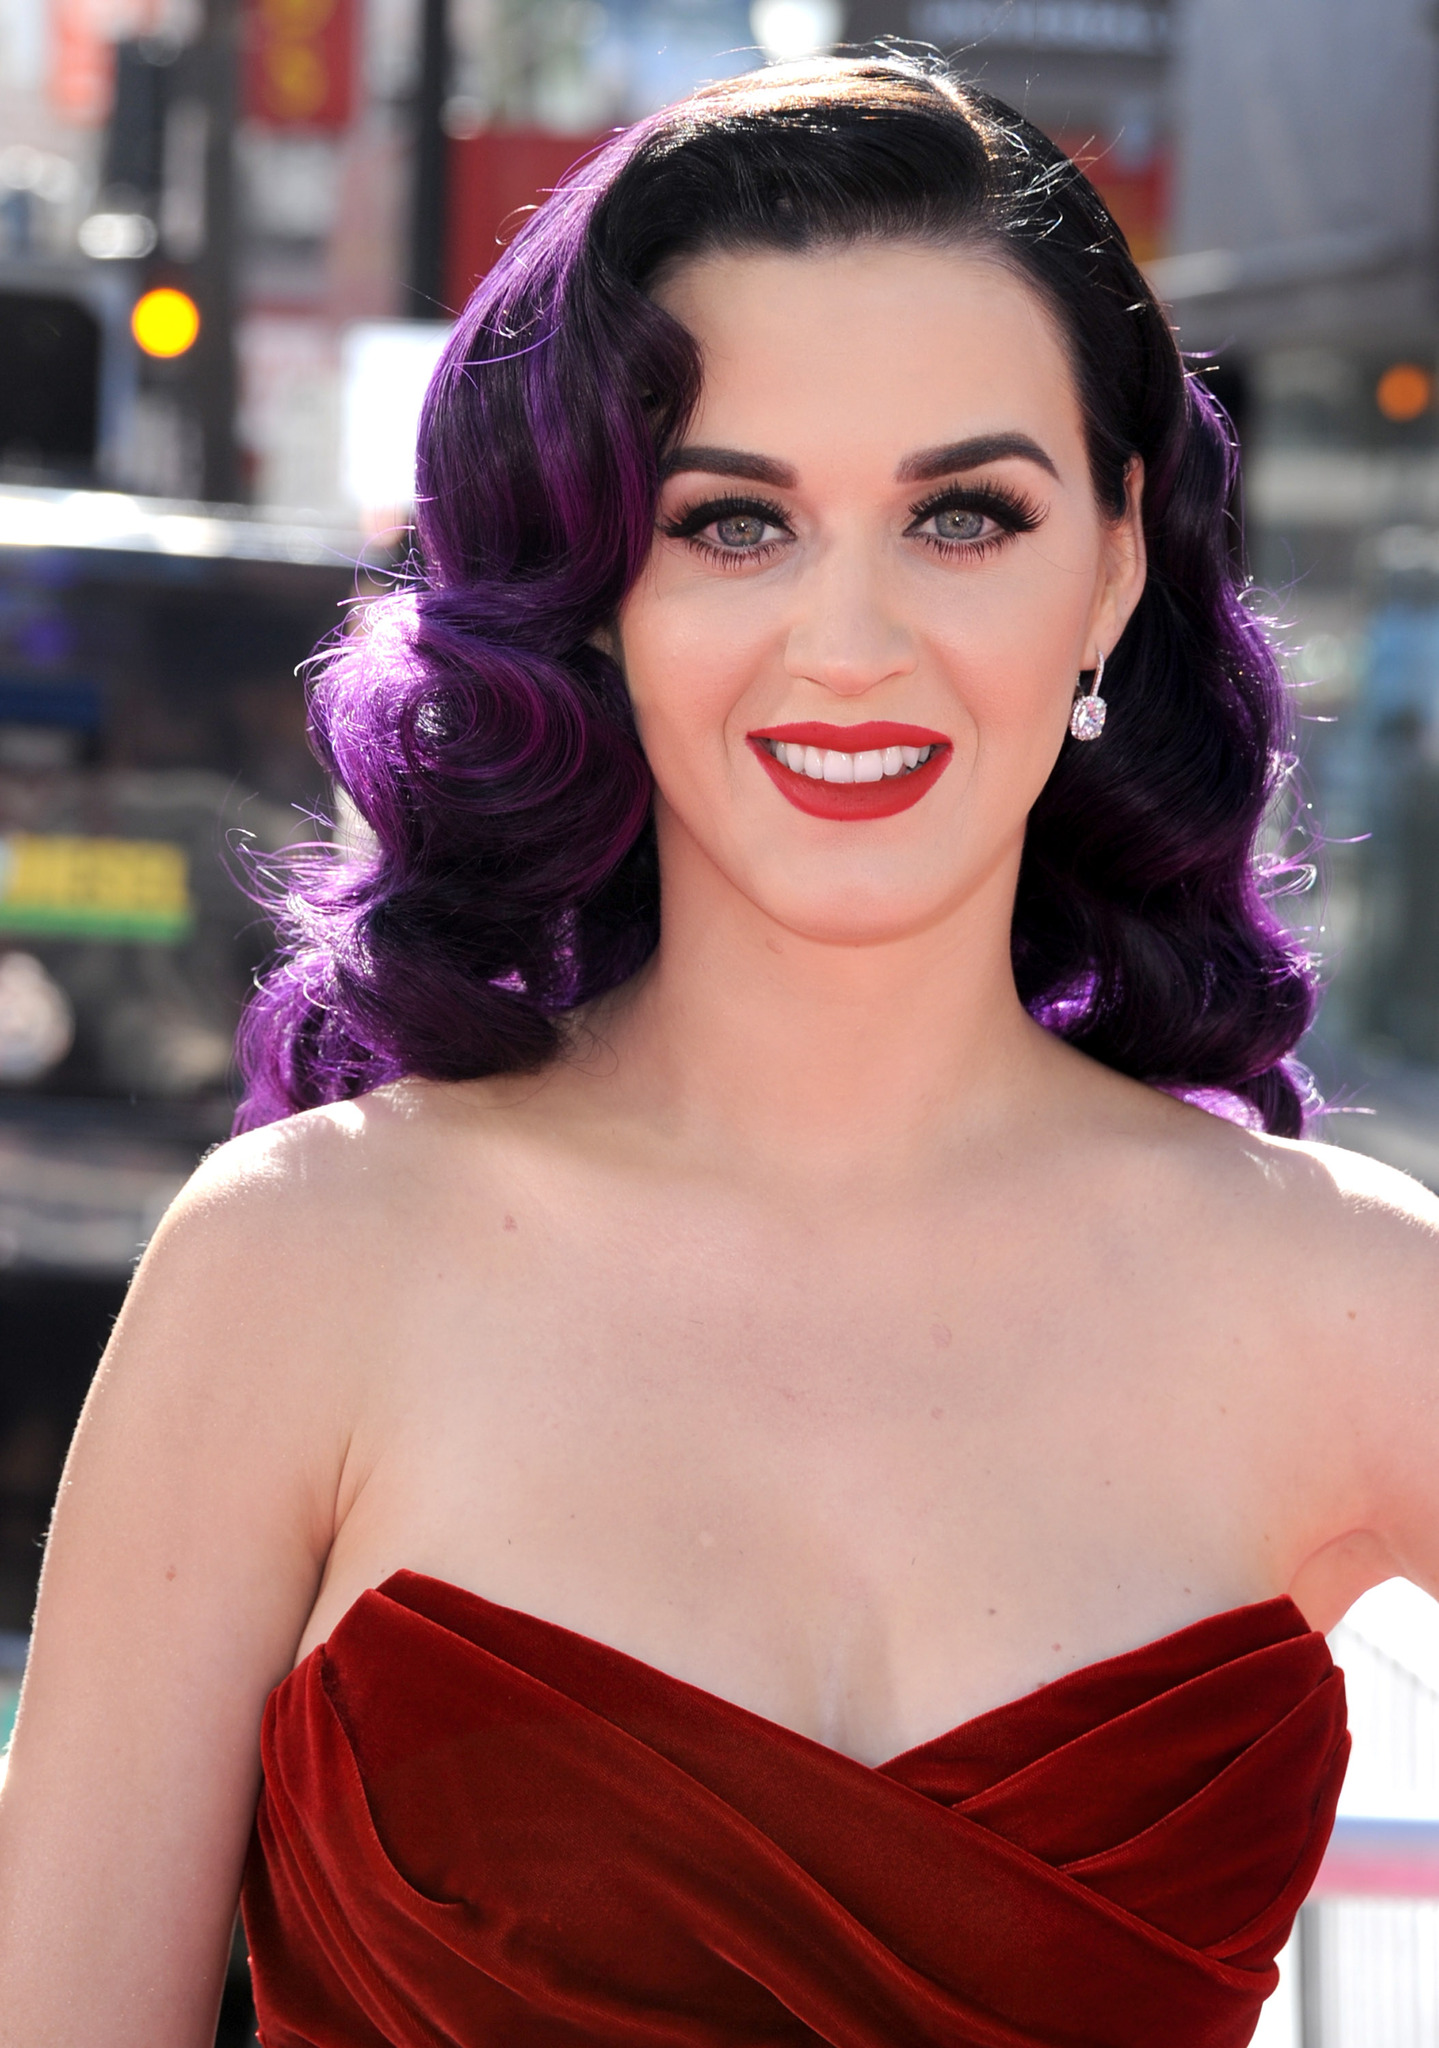  Best Images Of Katy Perry